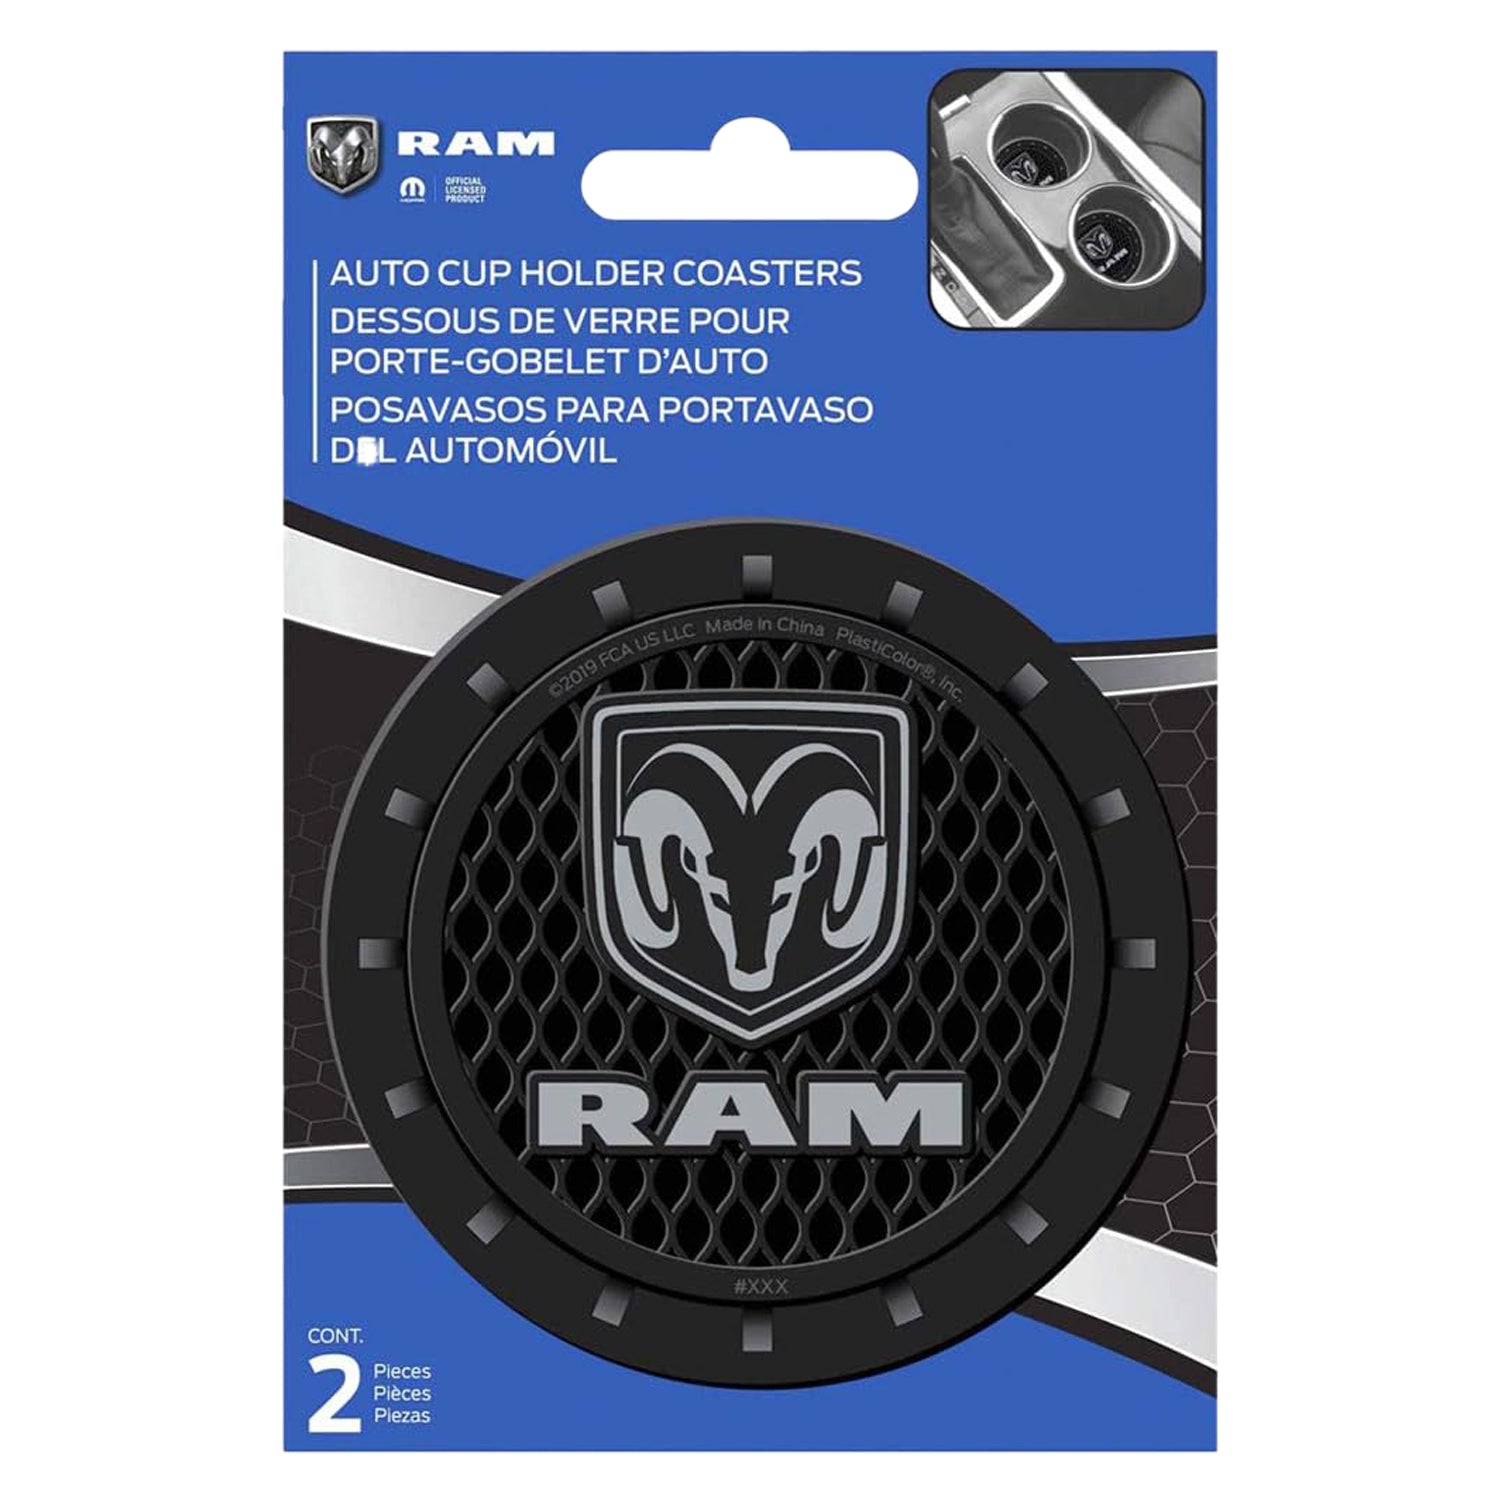 RAM Car Cup Coasters 2-Piece - Cute Coasters for Your Car Cup